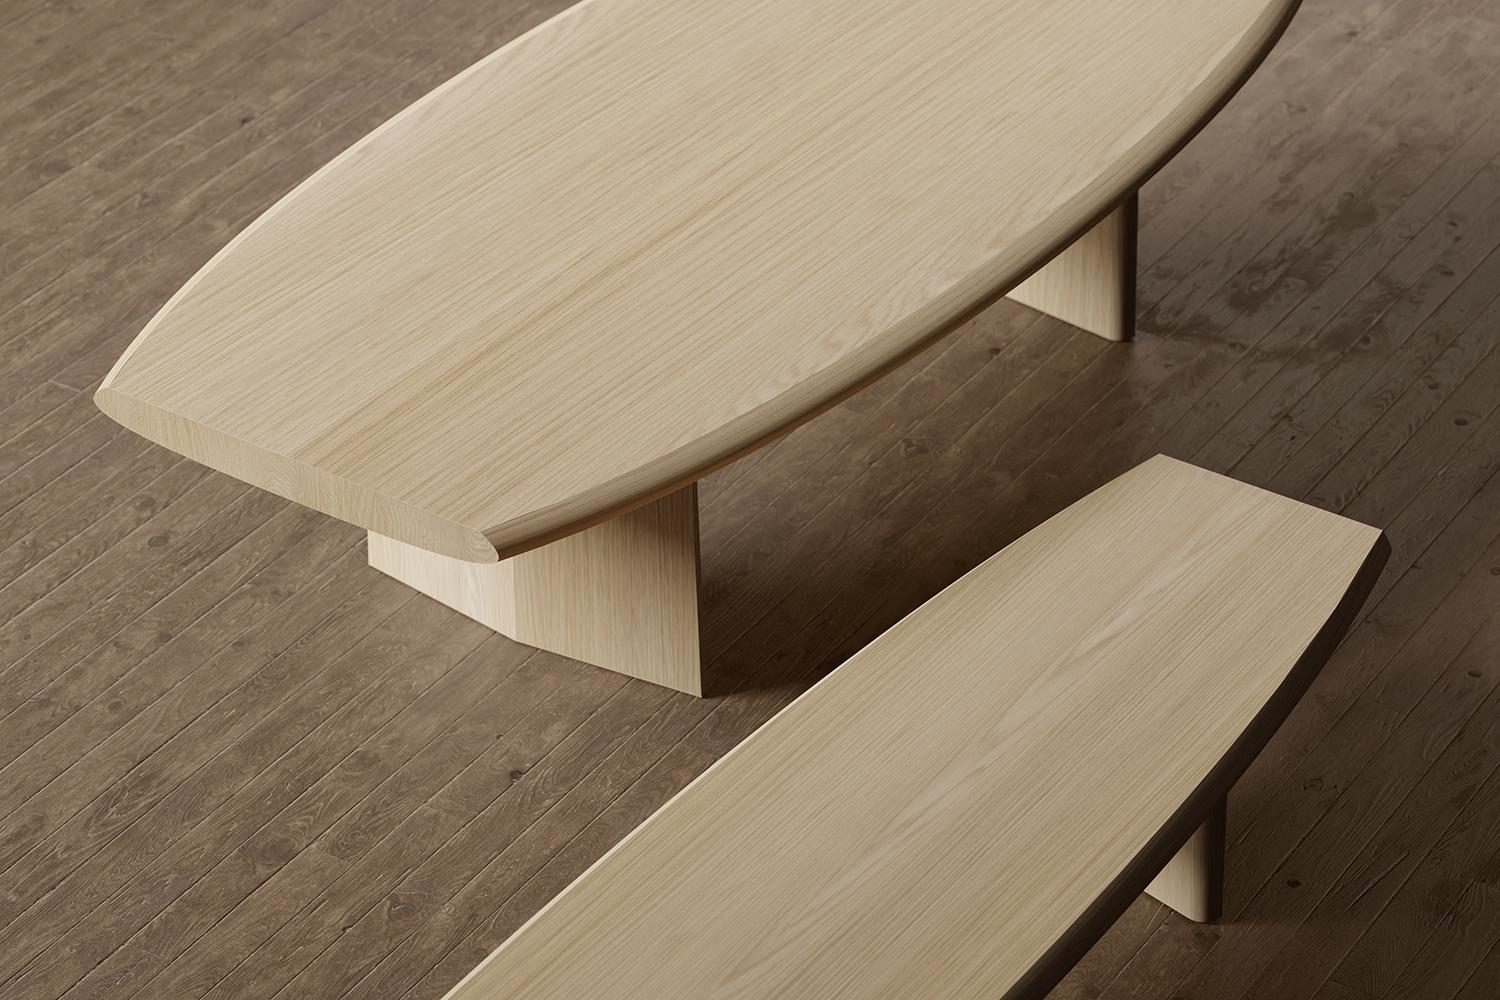 Mexicain Peana Coffee Table, Bench in Natural Oak Solid Wood Finish by Joel Escalona en vente